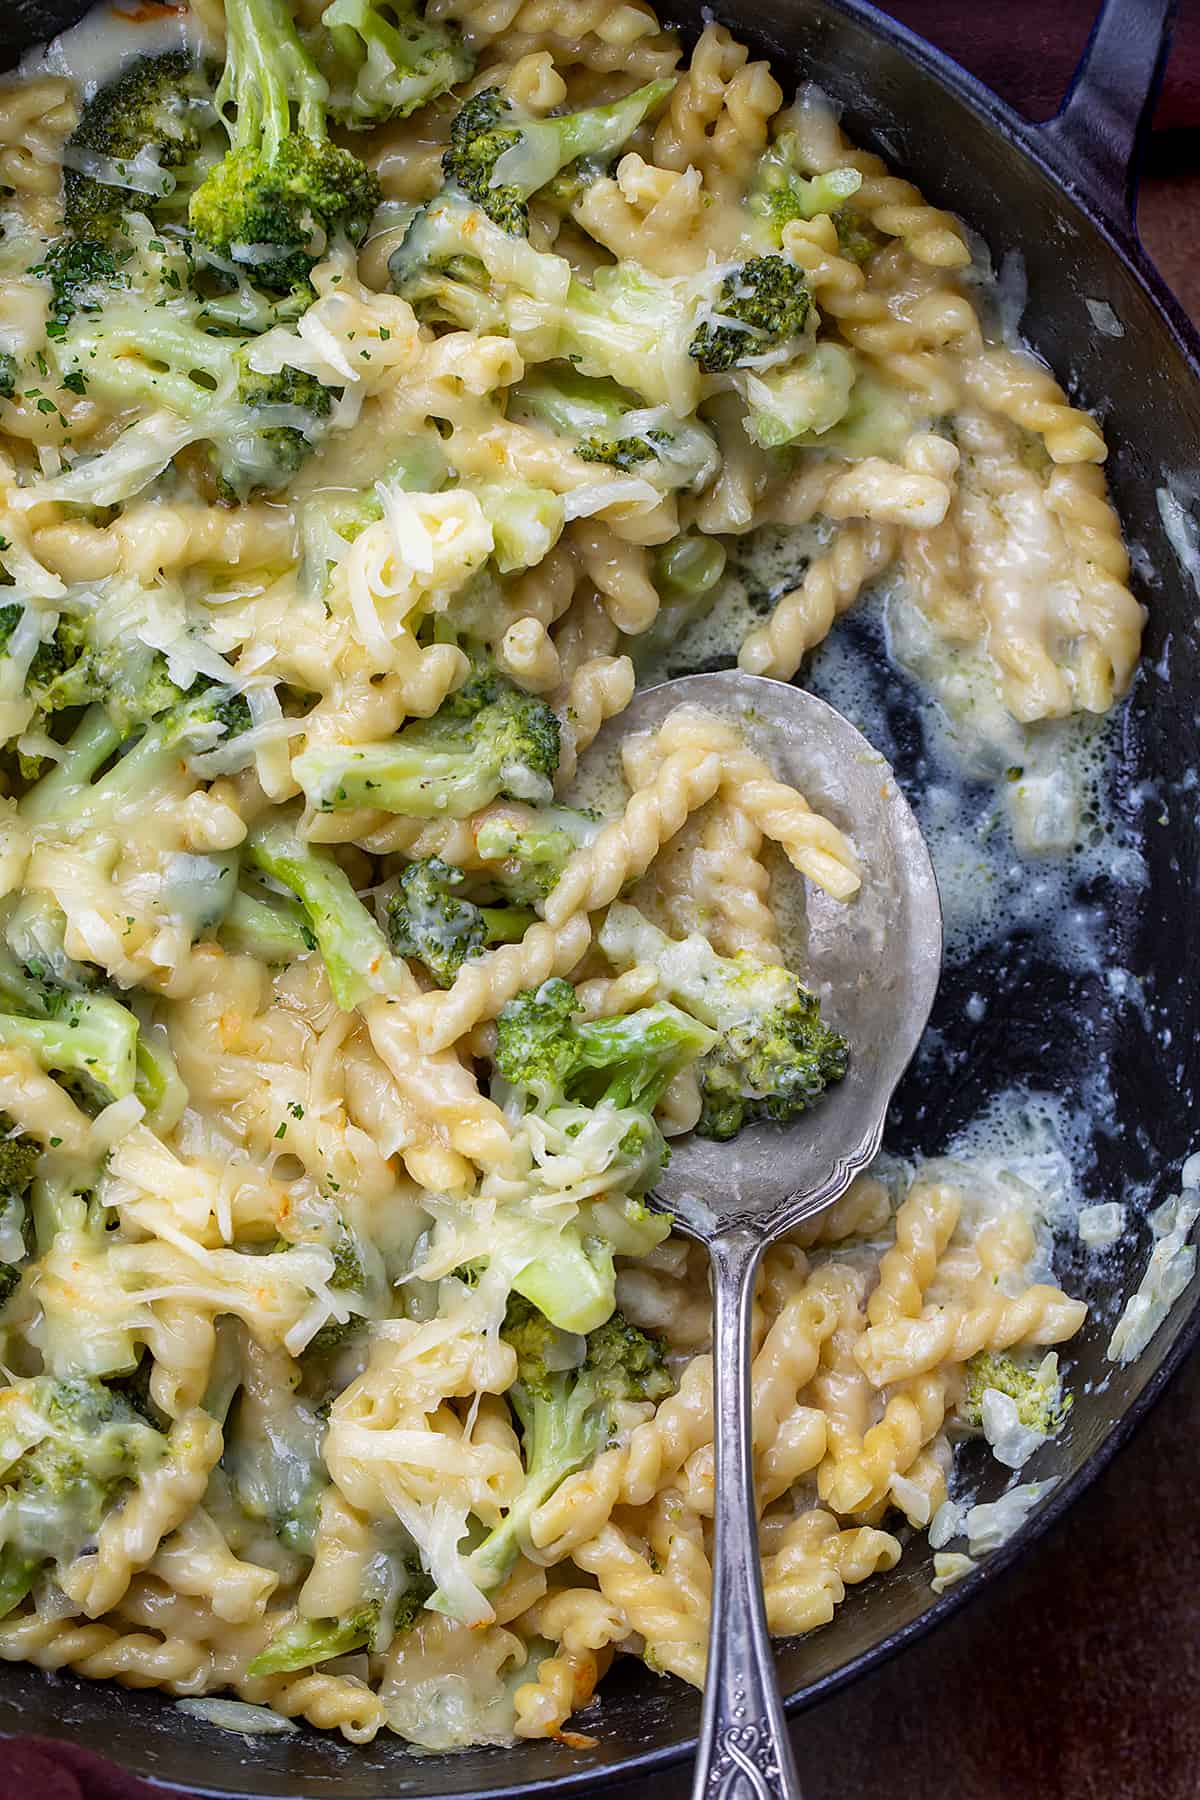 Spoon in a Pan of Broccoli Cheese Pasta with Some Removed.